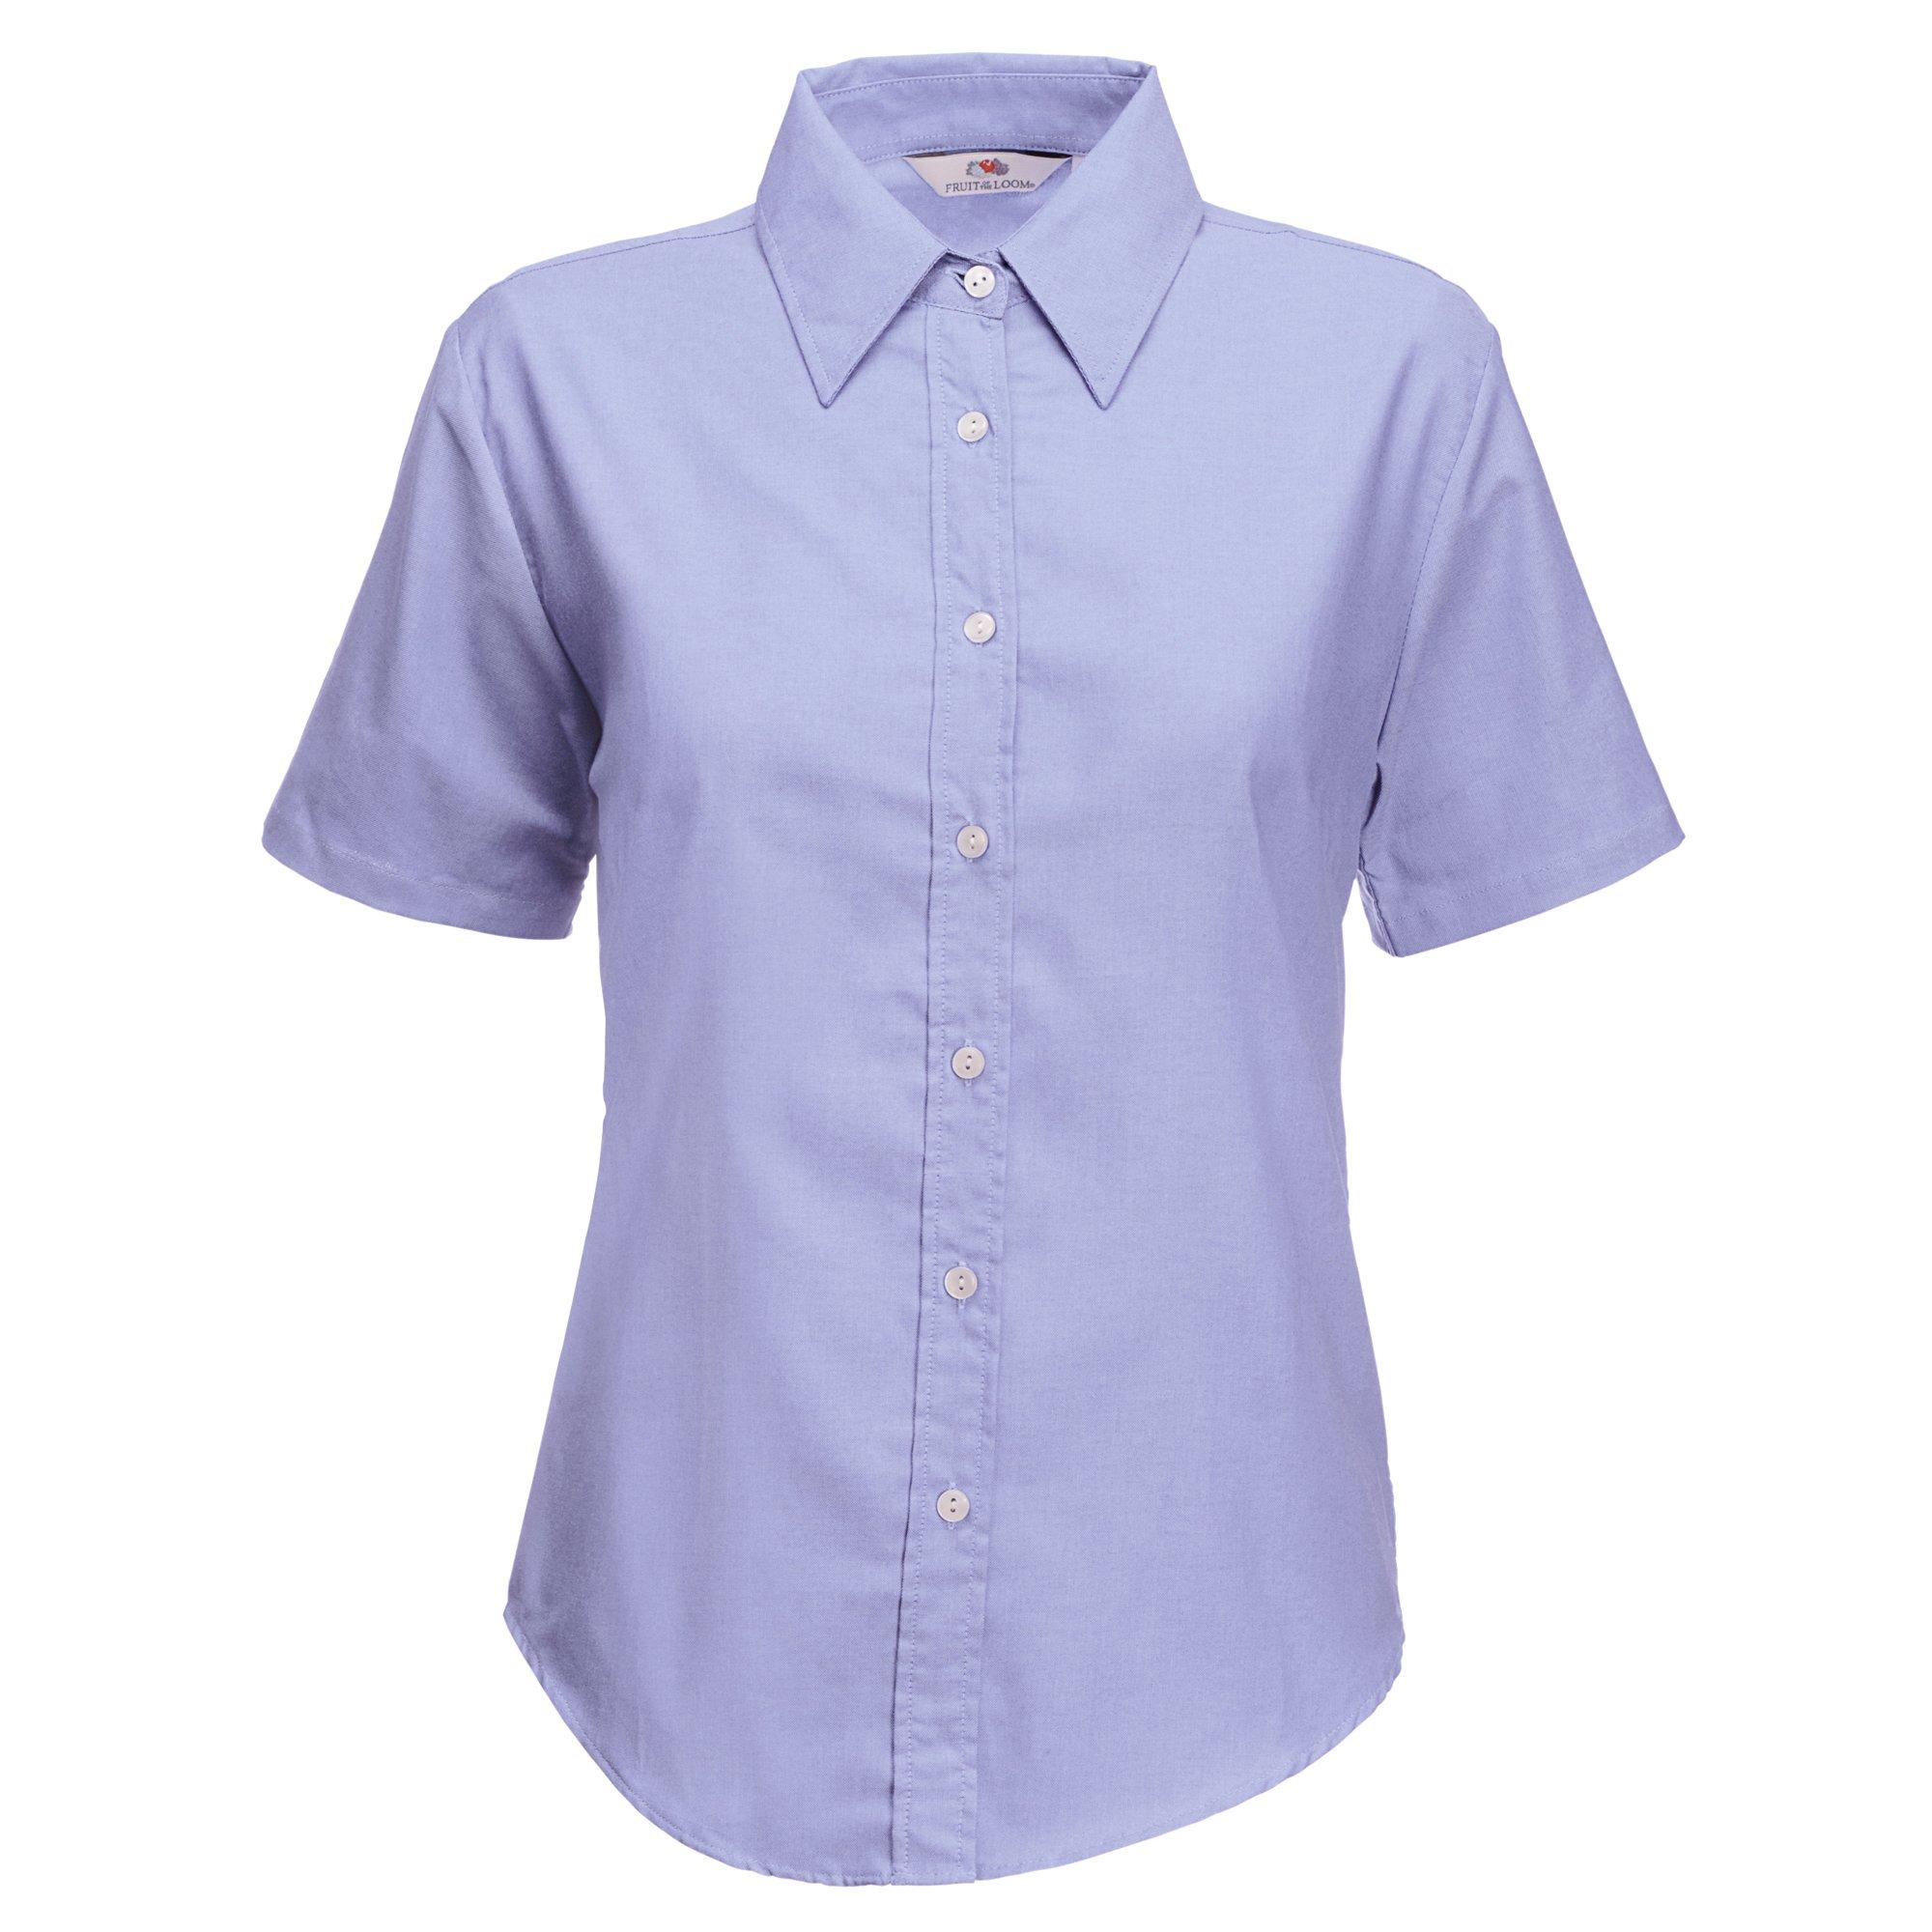 Image of Fruit of the Loom LadyFit Oxford Bluse, Kurzarm - M